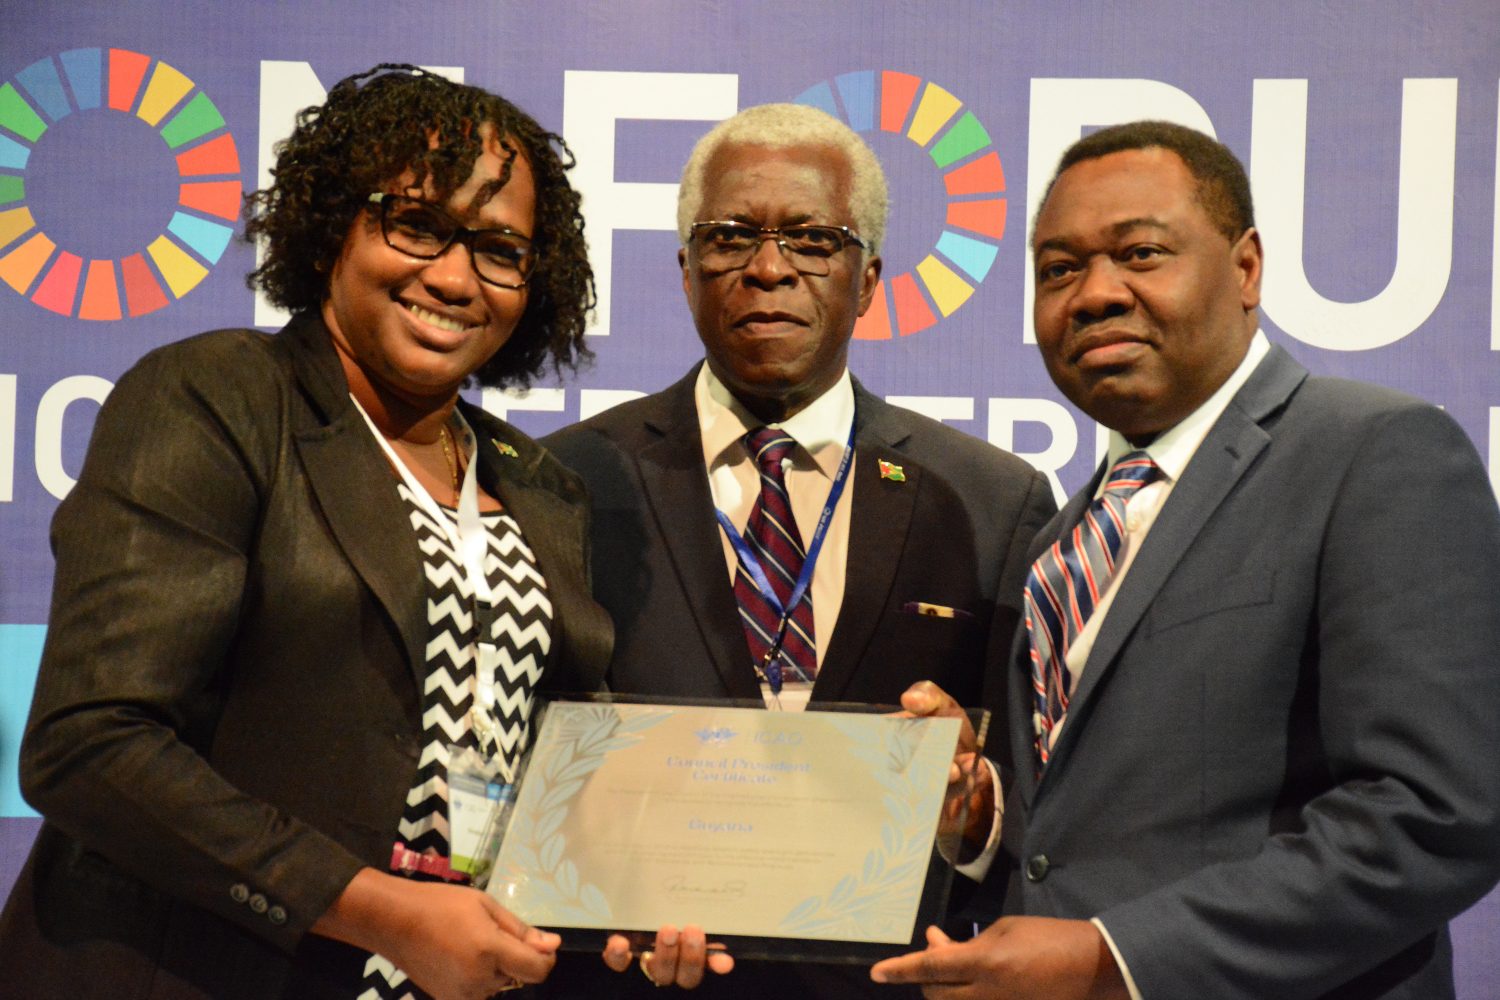 Director General, Lt. Col. Egbert Field (centre) and  Minister Annette Ferguson (left), receiving the ICAO Council President’s Certificate from the ICAO Council President, Dr. Olumuyiwa Benard Aliu. 
